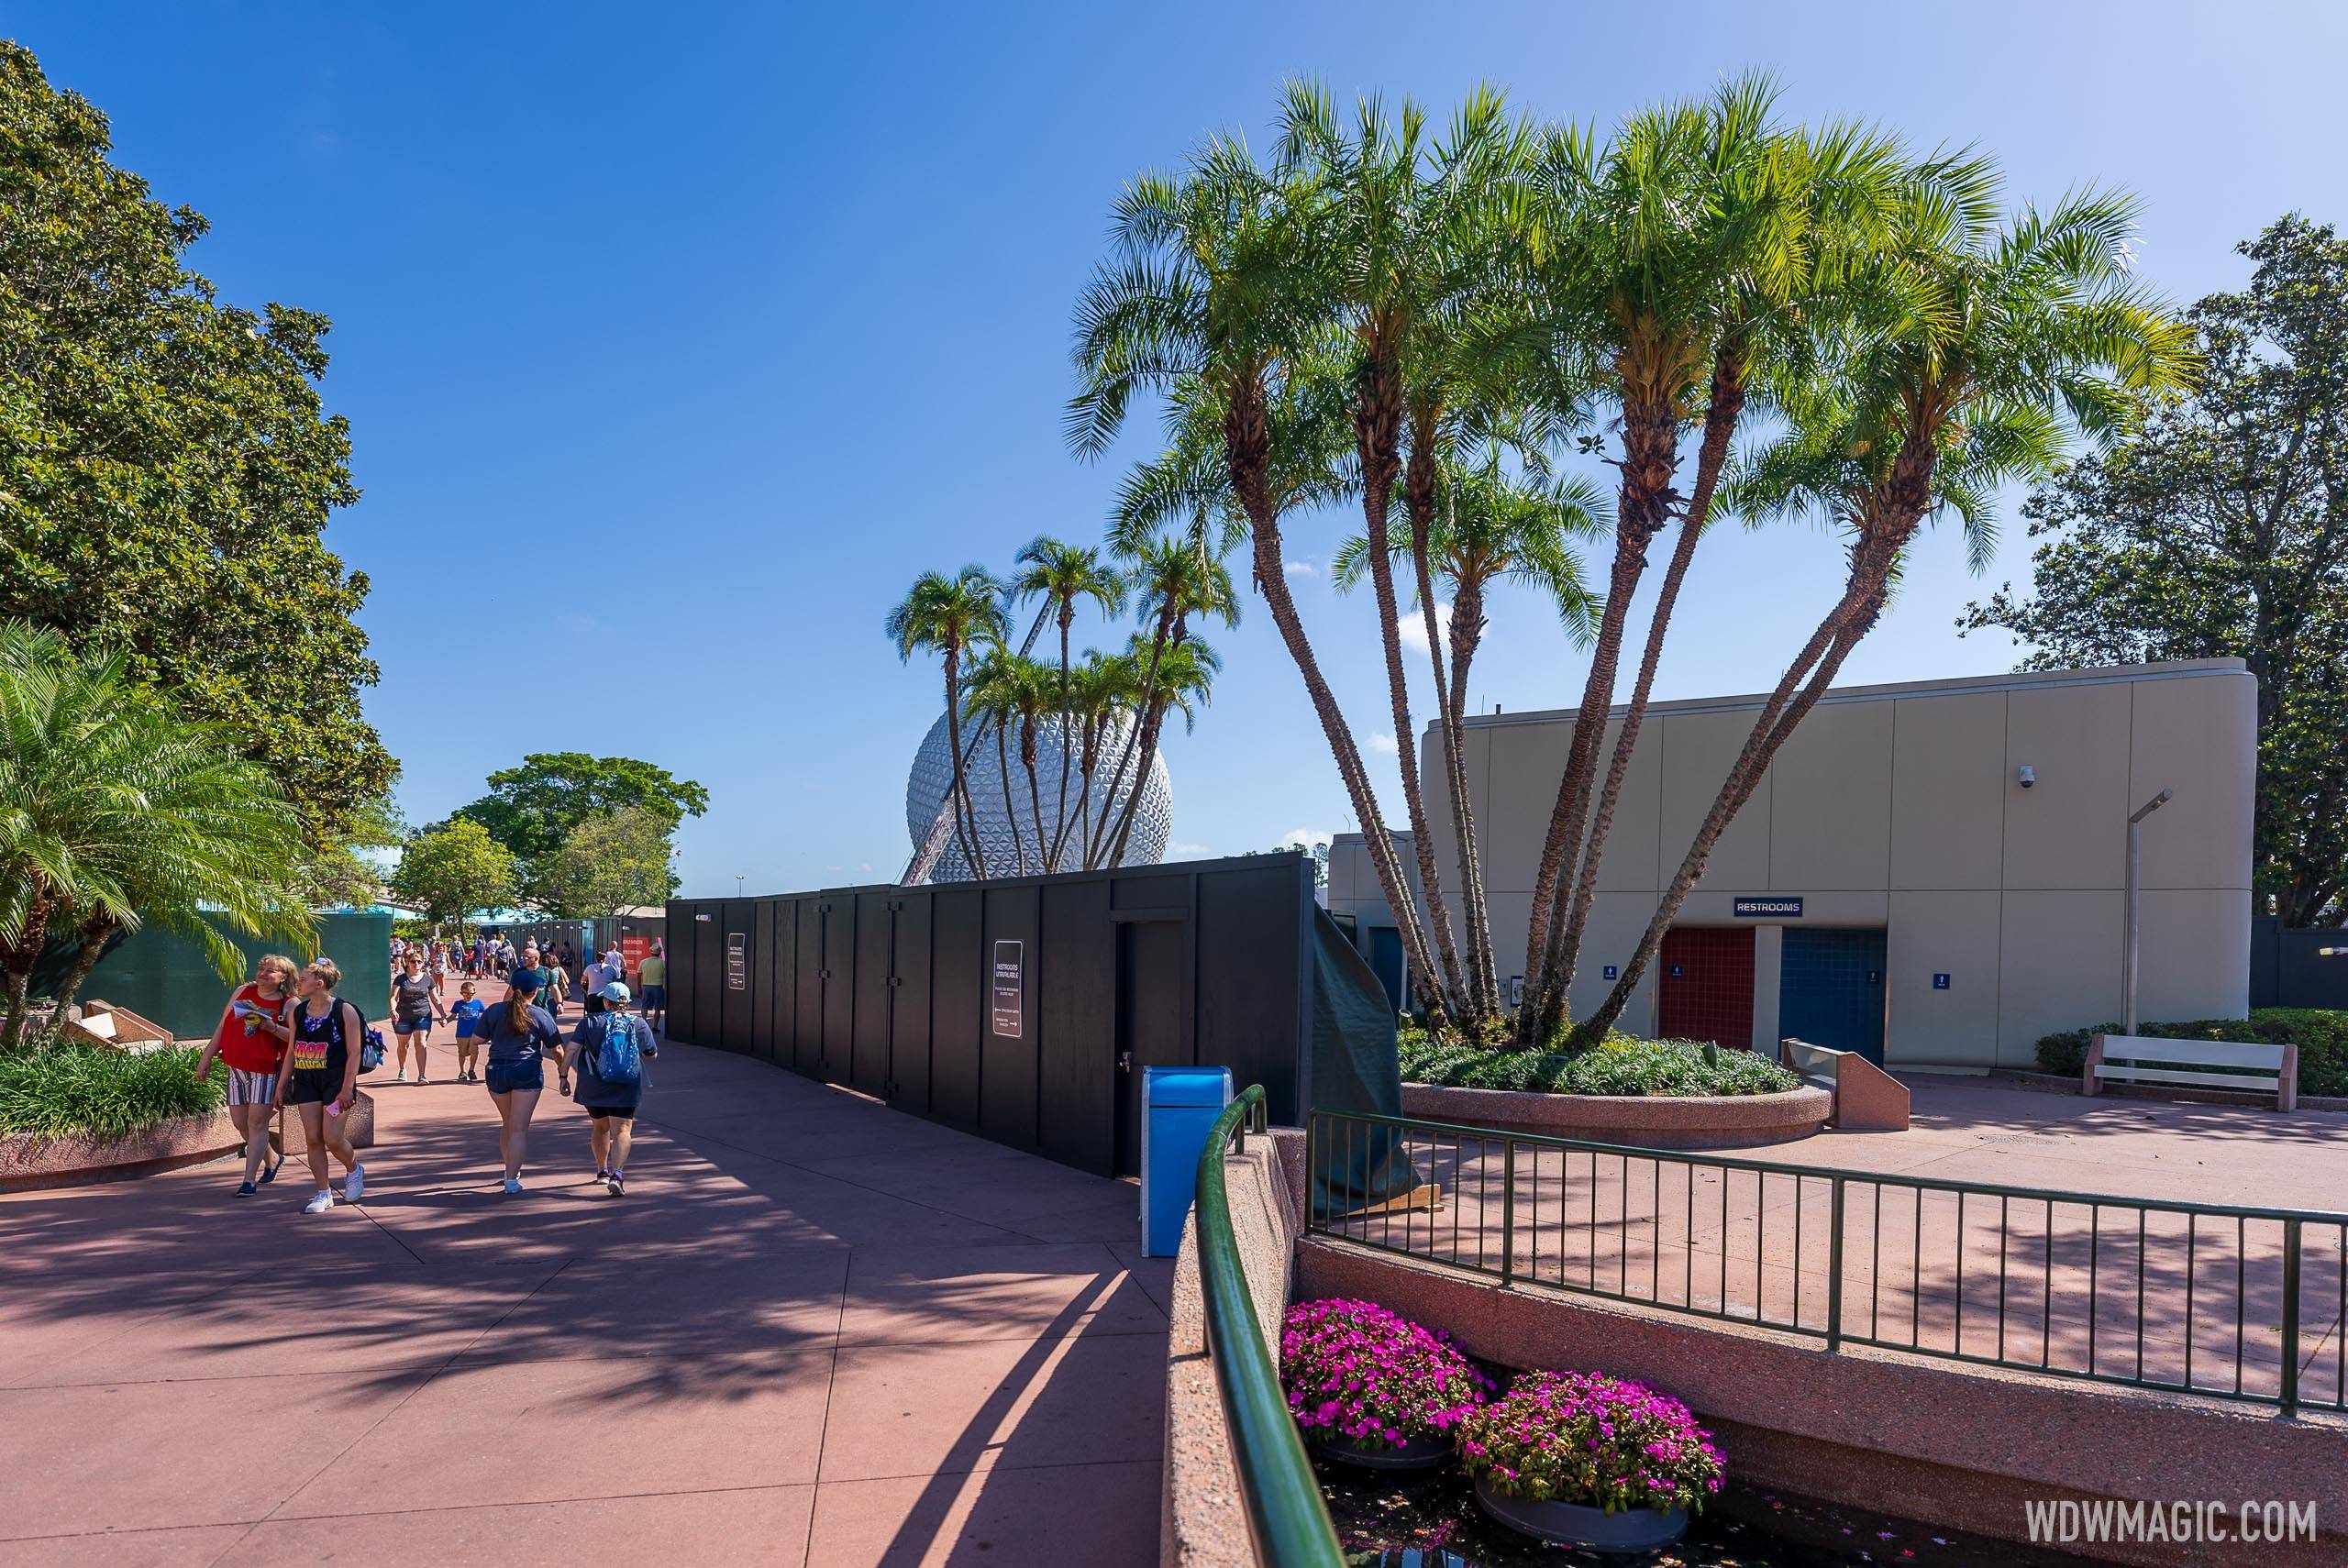 Construction walls in World Nature and restroom closure - April 26 2022